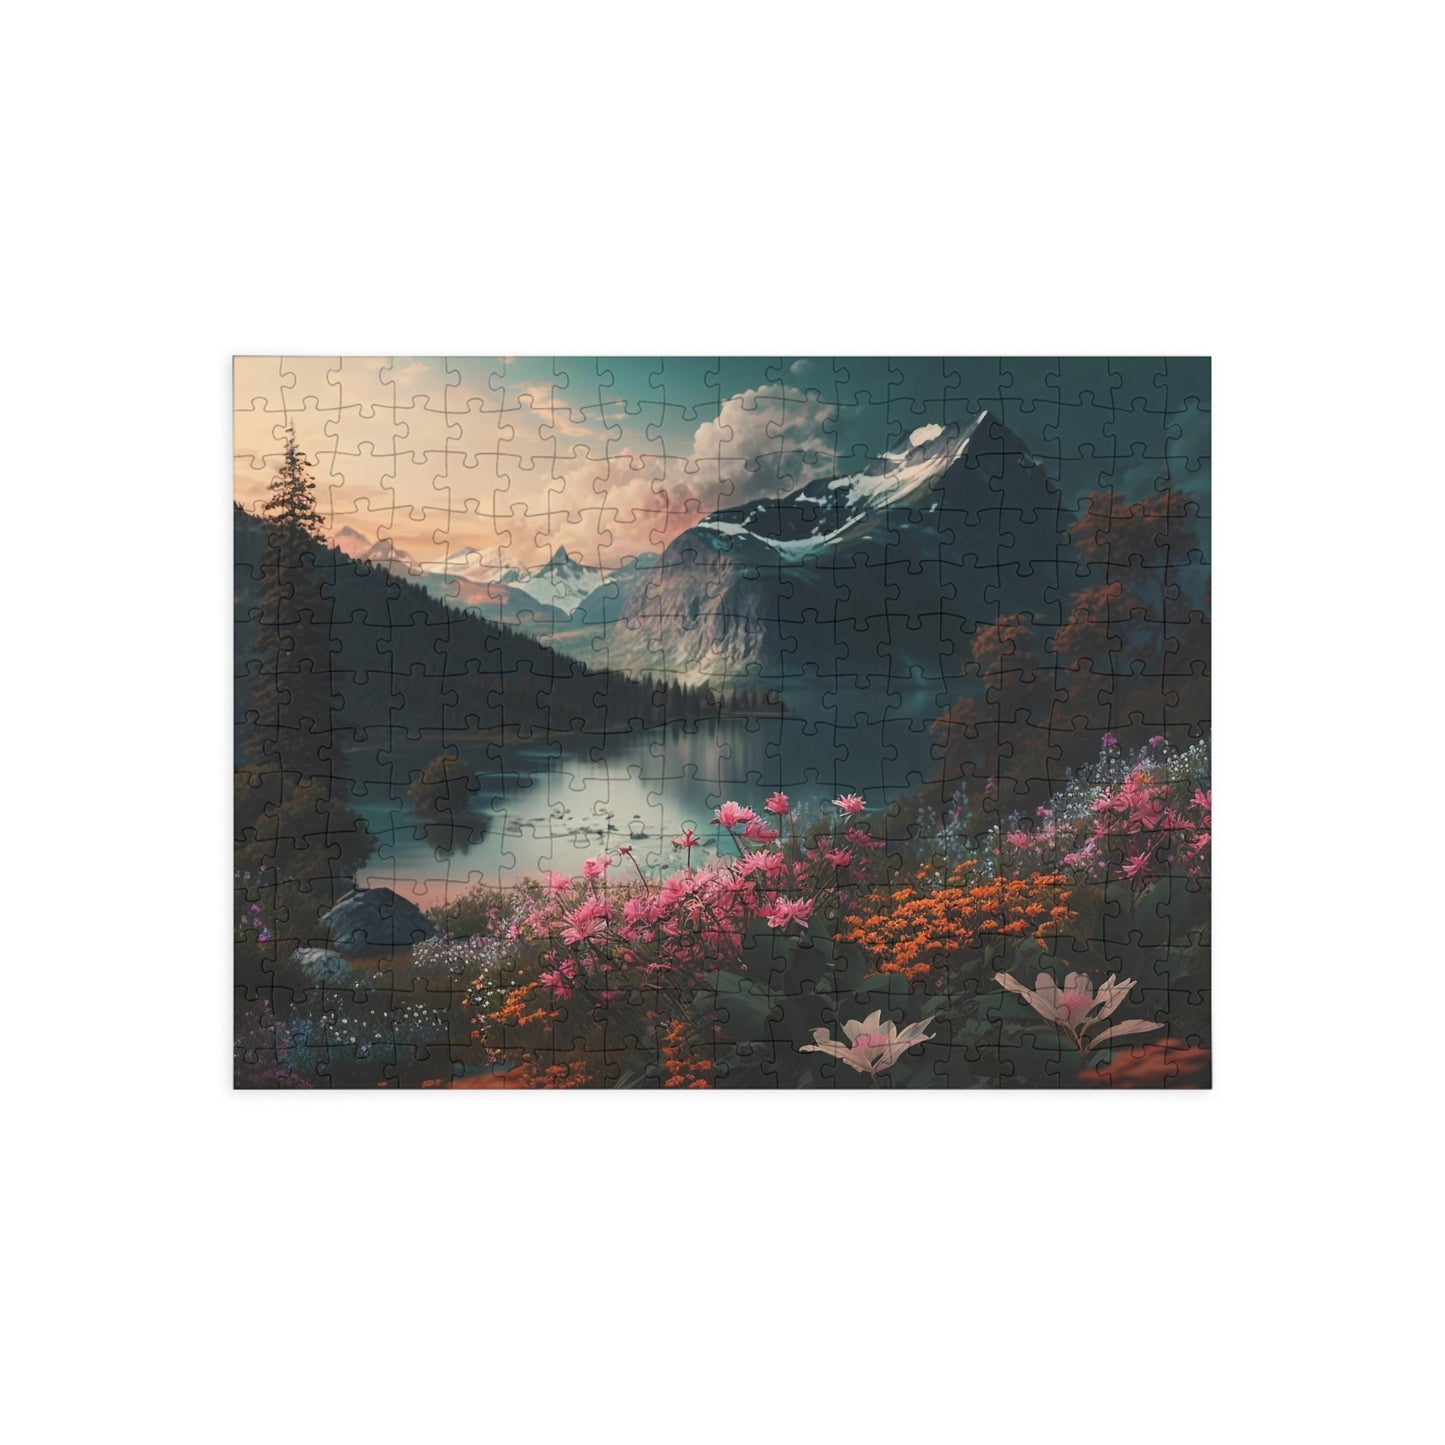 Beauty of Nature Puzzle 1000 Piece Puzzle, Calm Nature Landscape Jigsaw Puzzle , Serene Mountain Lake with Flowers 252, 500 Piece Puzzle